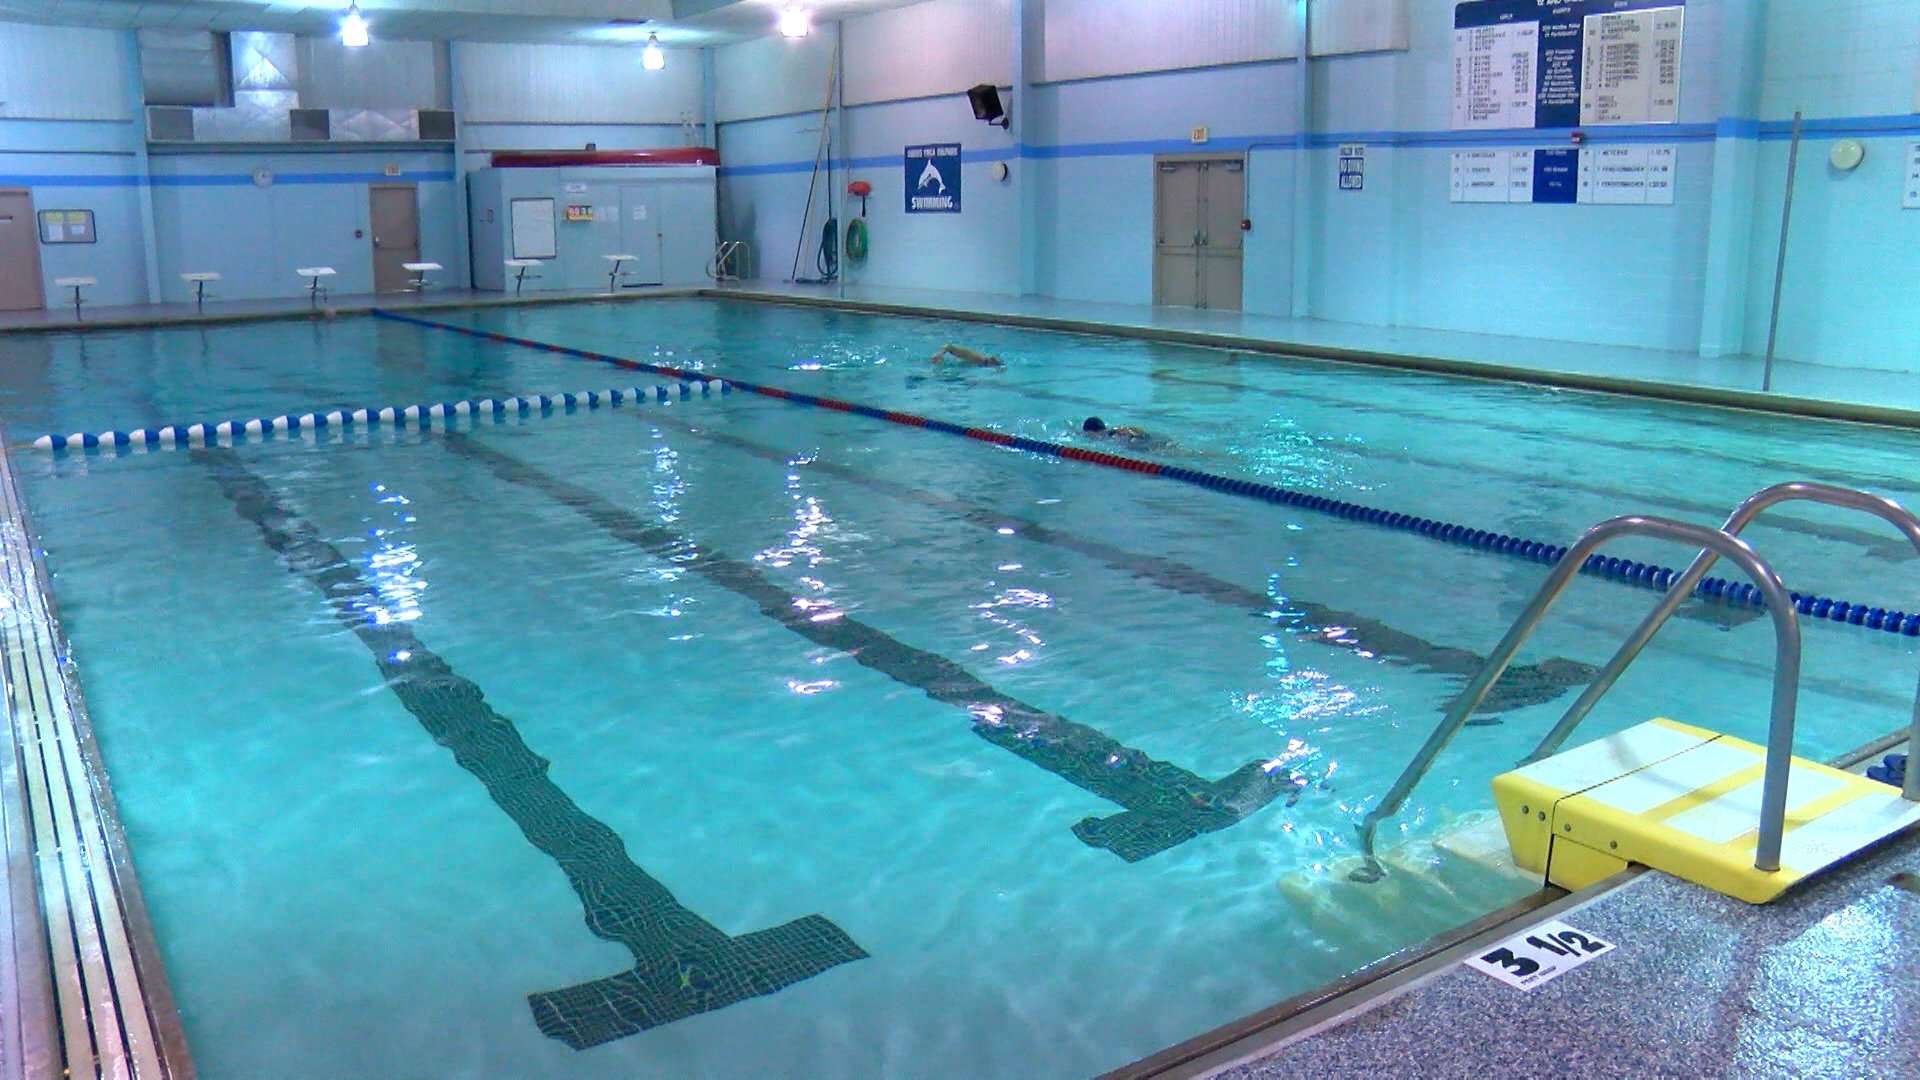 YMCA pool reopens as part of four year renovation plan